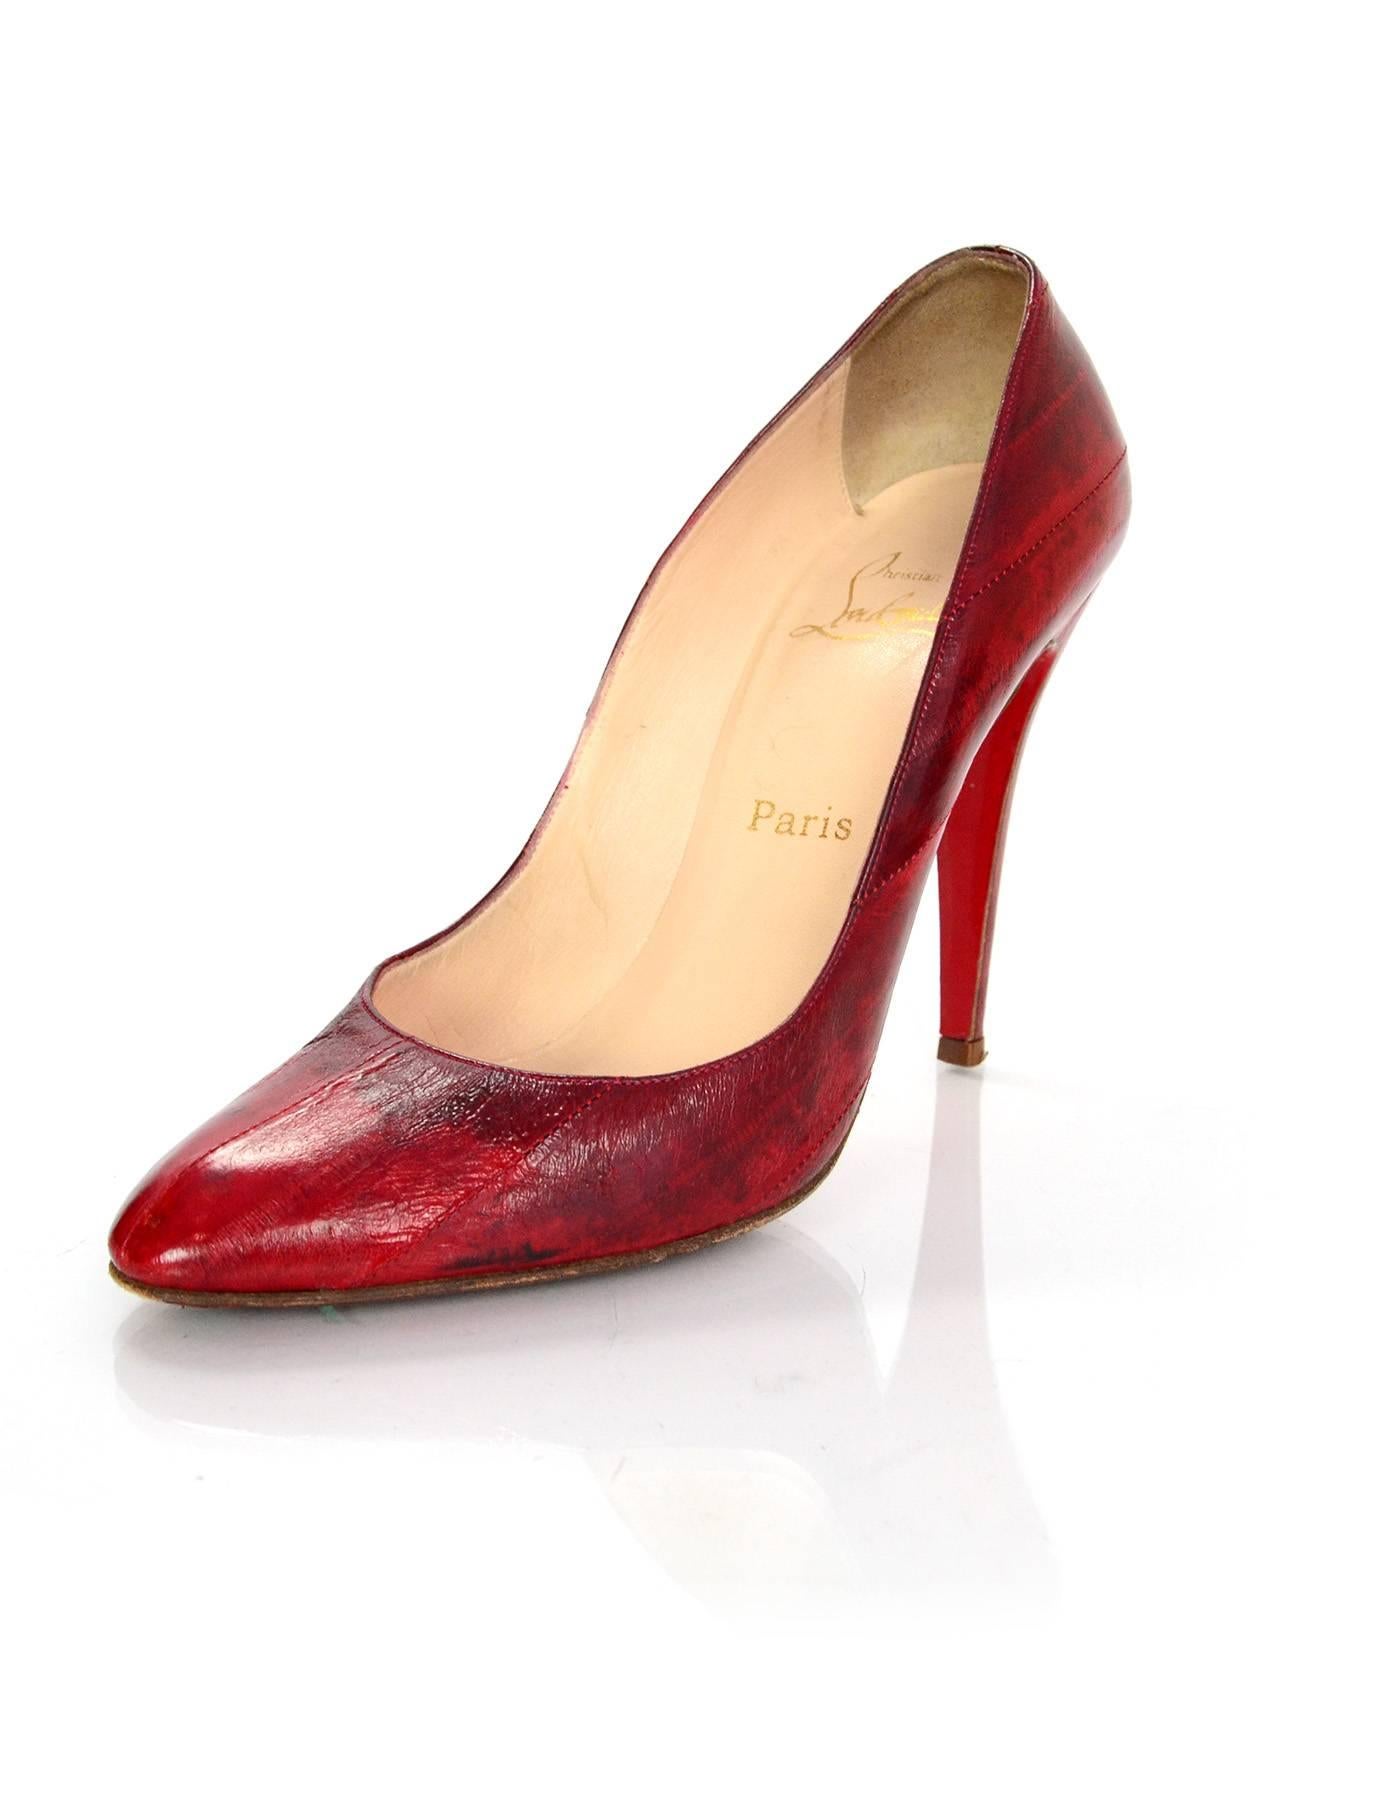 Christian Louboutin Red Eel Skin Pumps

Made In: Italy
Color: Red
Materials: Eel Skin
Closure/Opening: Slide on
Sole Stamp: Christian Louboutin Vero Cuoio Made in Italy 40
Overall Condition: Excellent pre-owned condition with the exception of